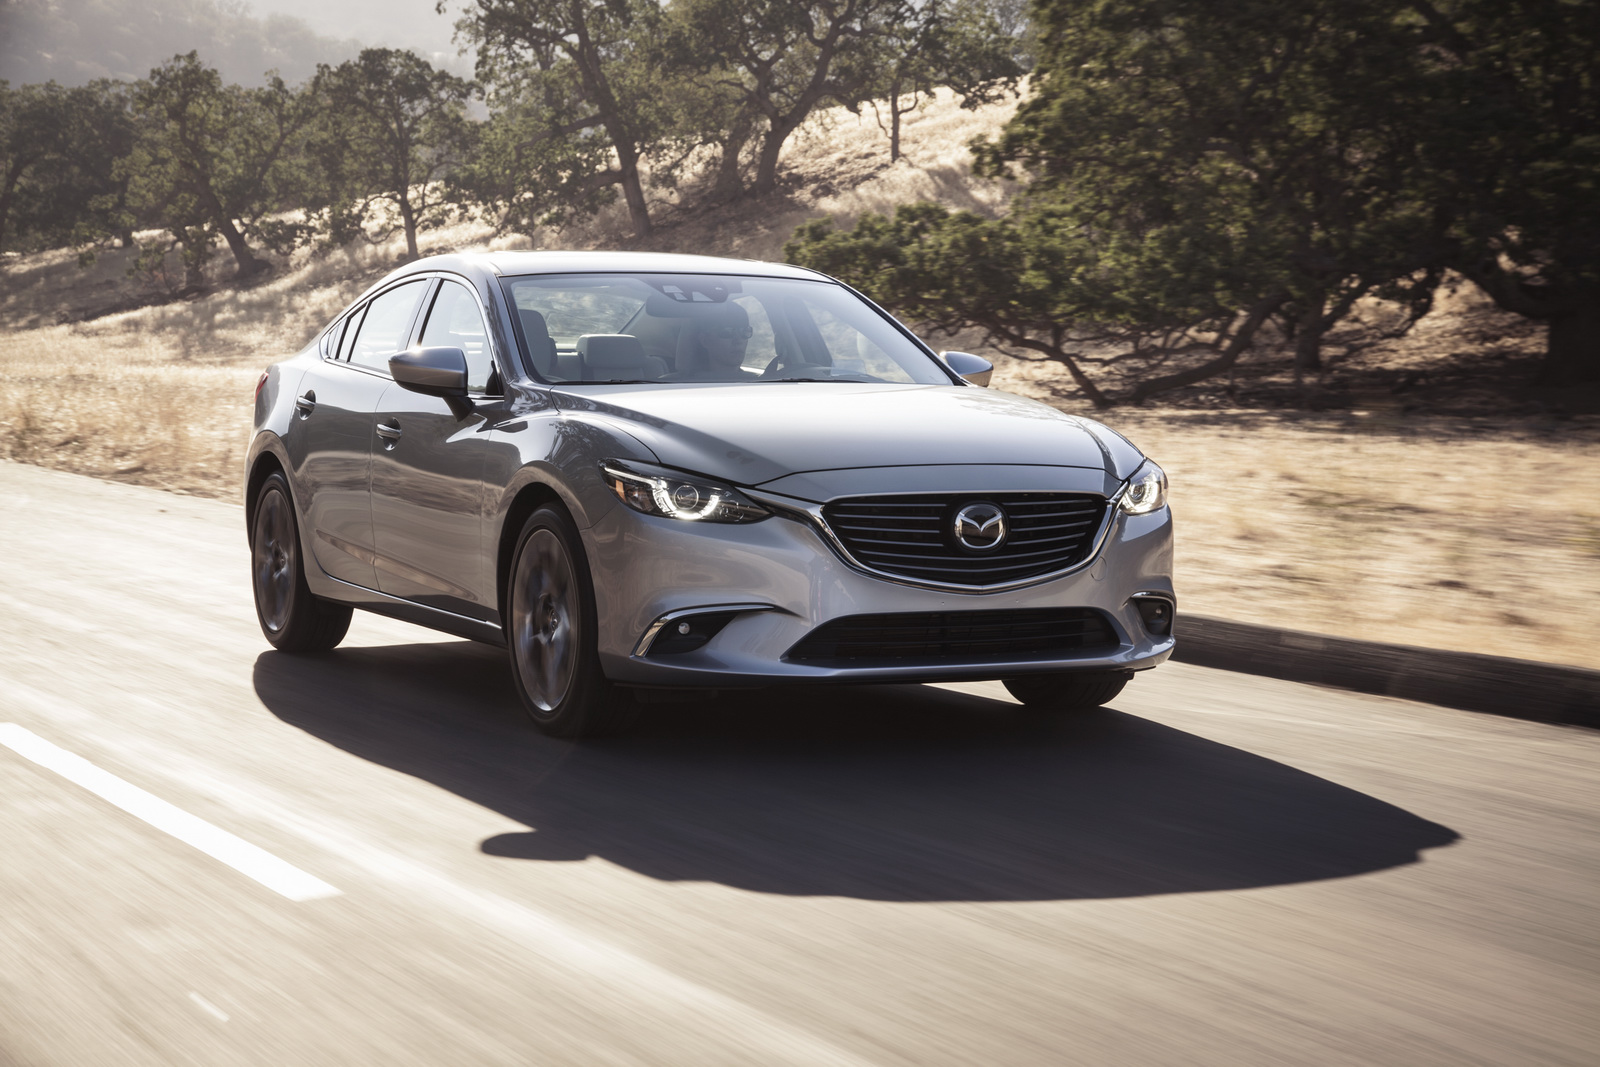 2016 Mazda 6 Road Test, Review, Pricing, Fuel Economy,